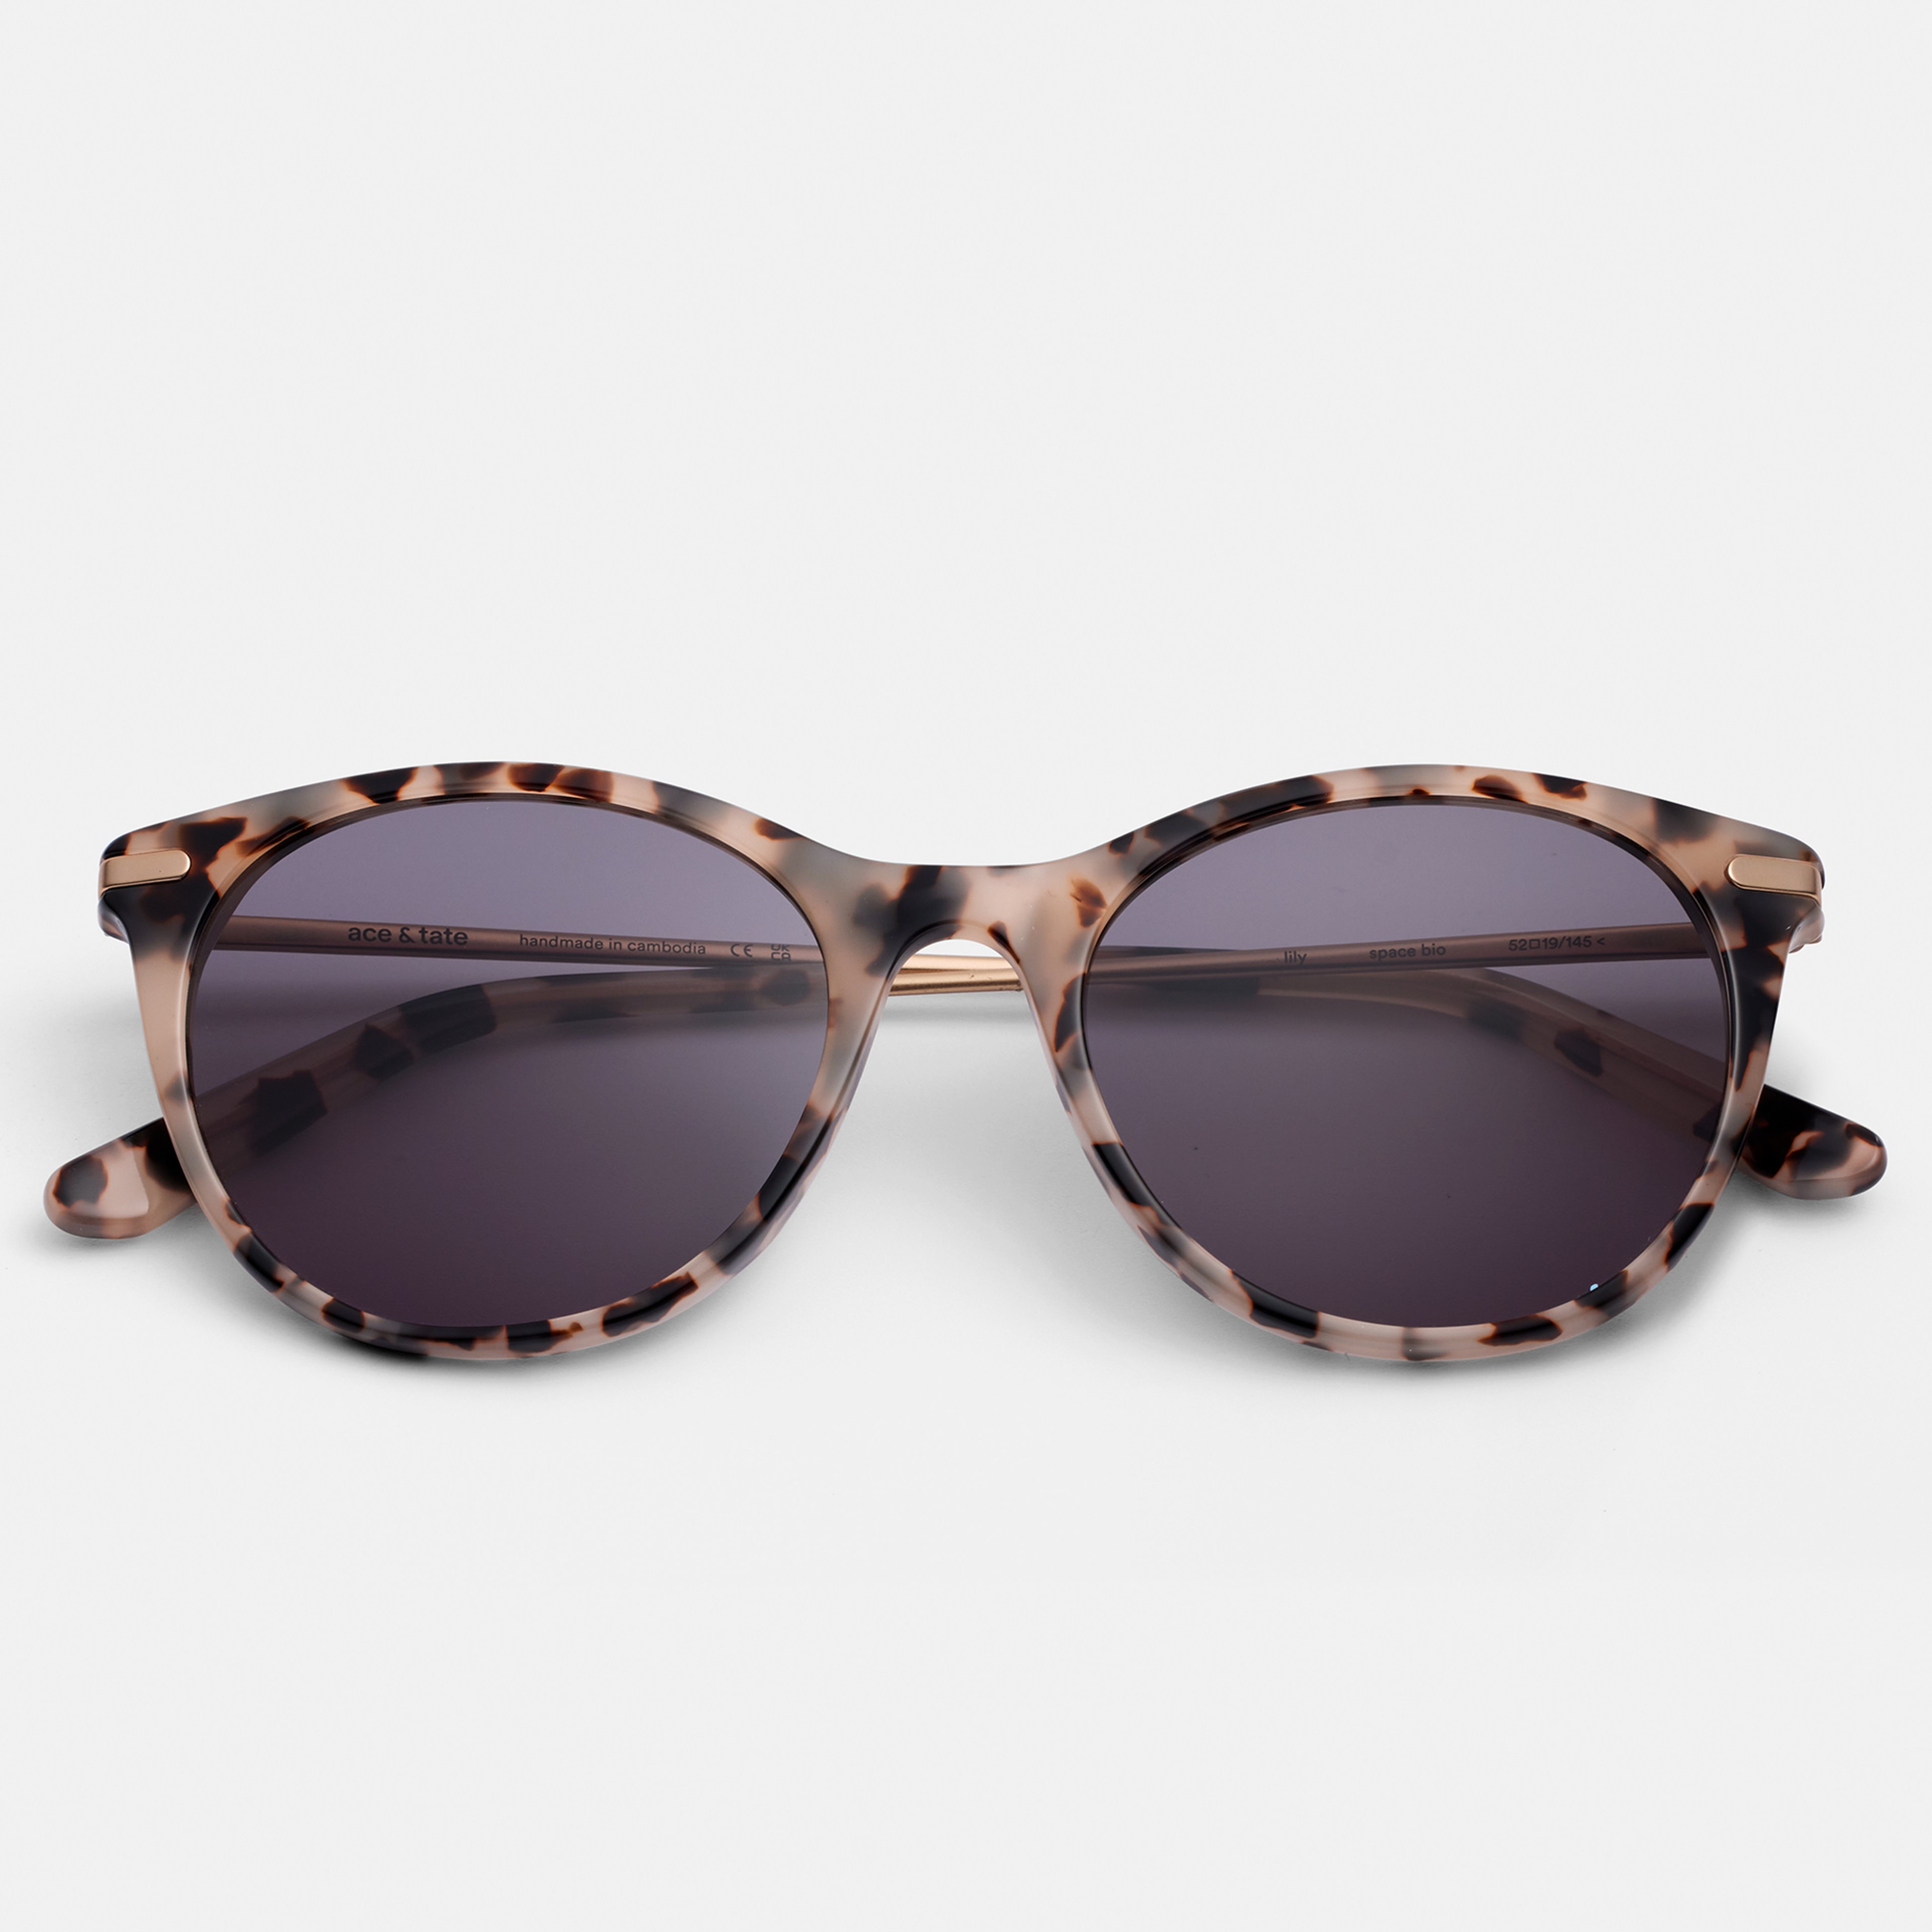 Ace & Tate Sunglasses | Round Metal in Beige, Brown